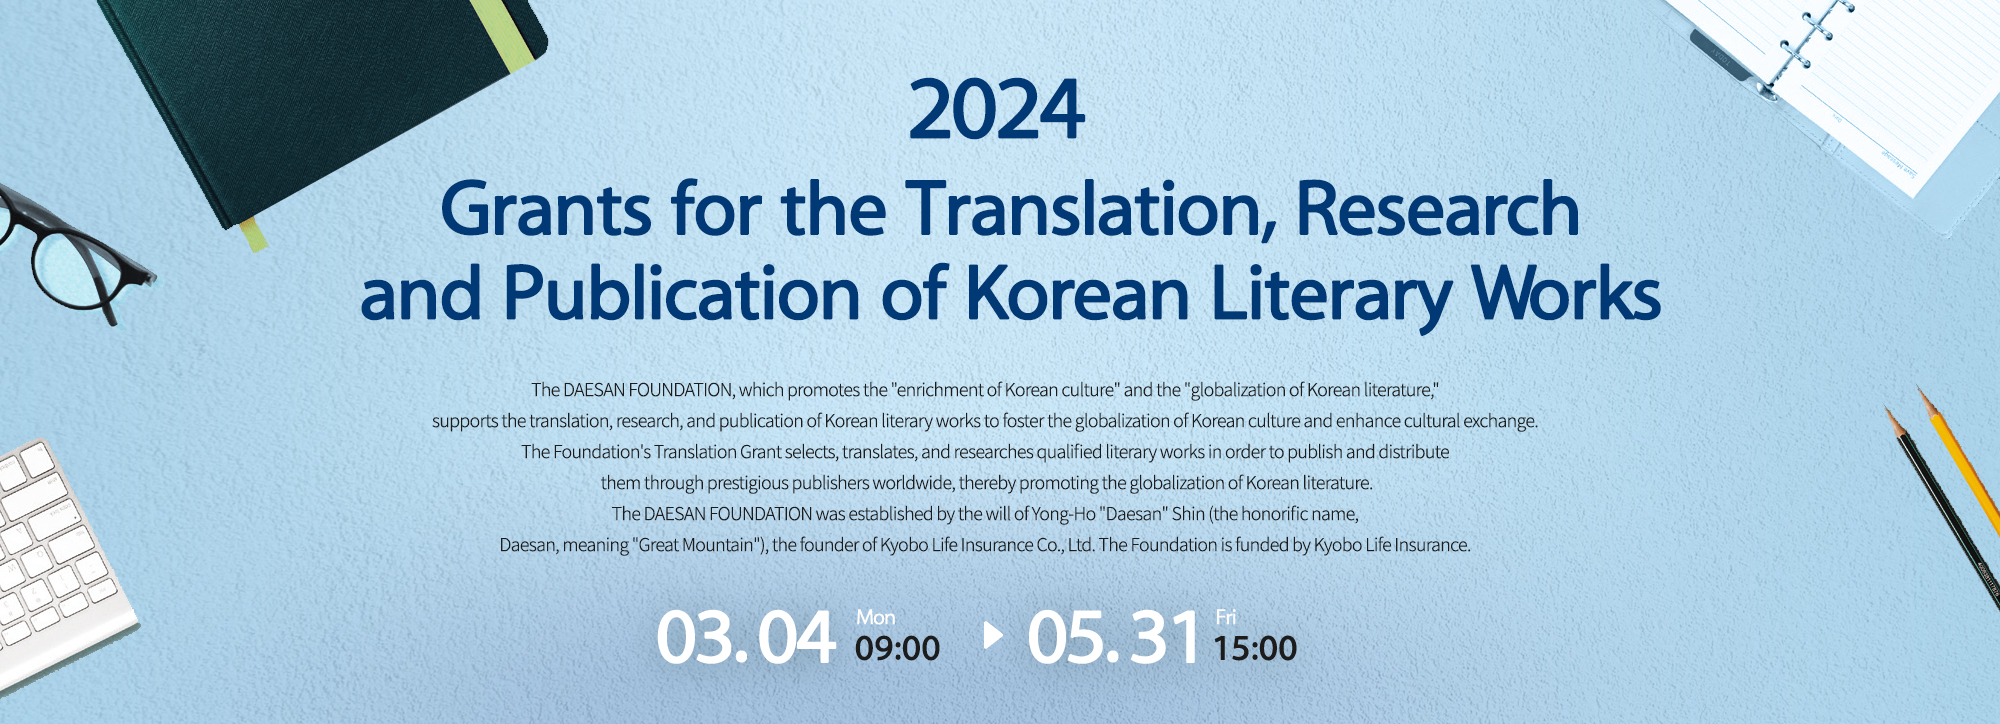 Grants for the Translation, Research and Publication of Korean Literary Works for 2024